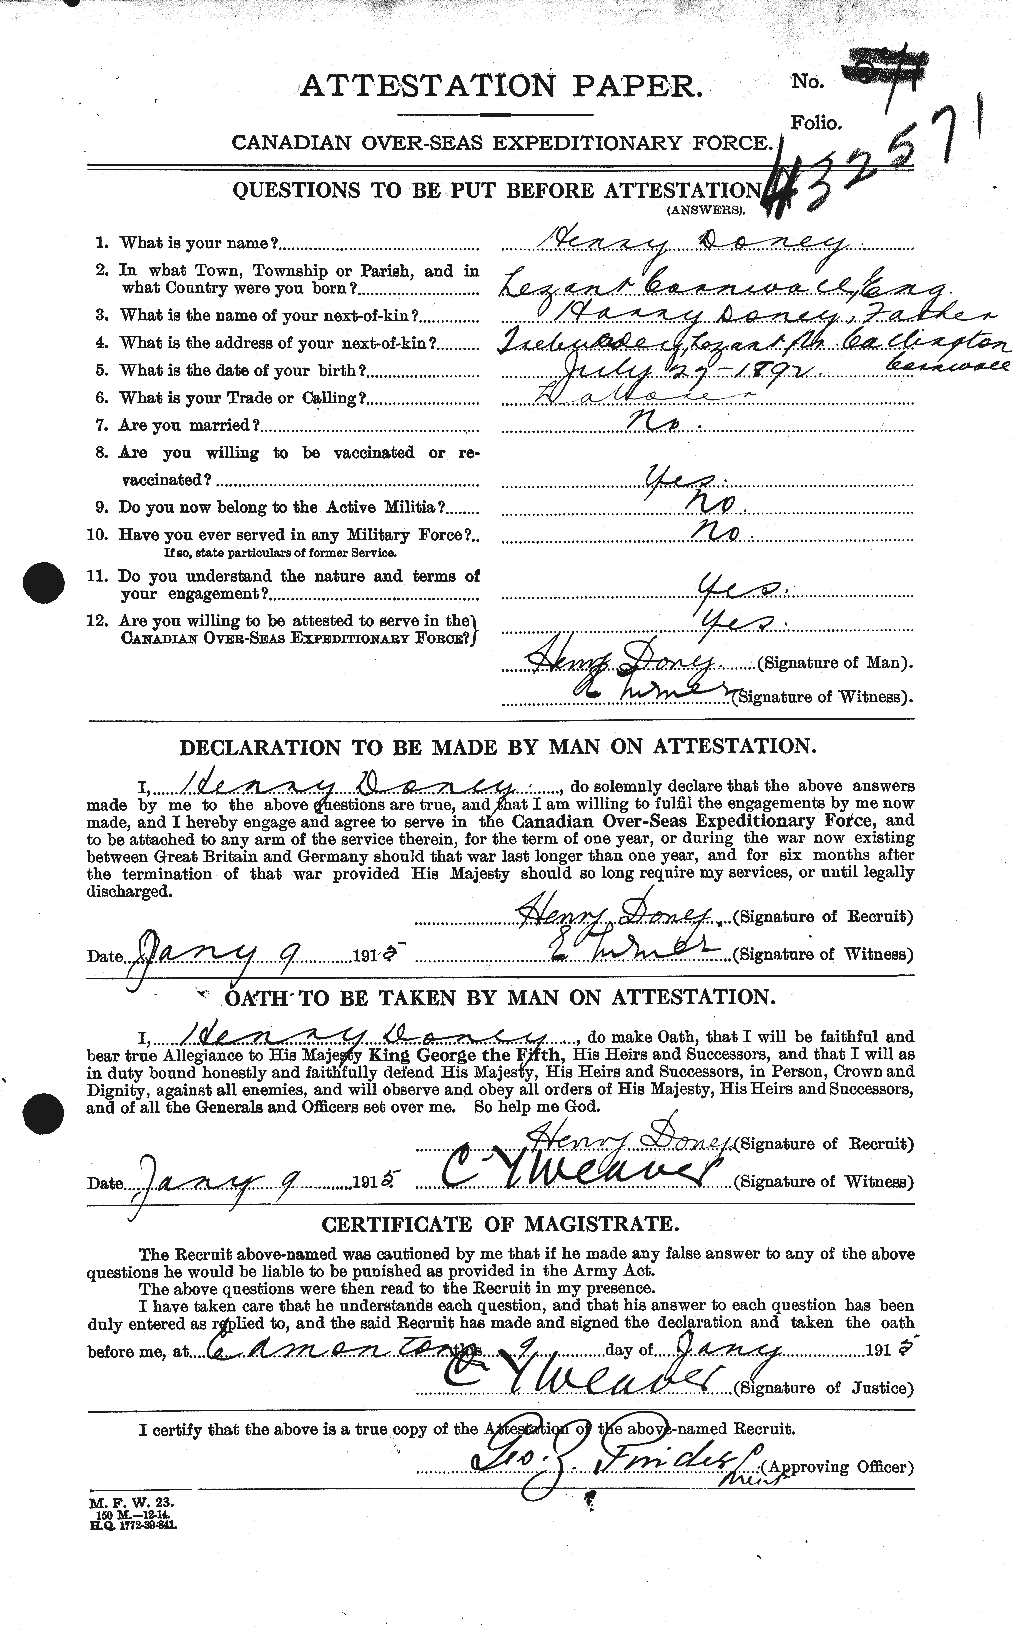 Personnel Records of the First World War - CEF 294678a